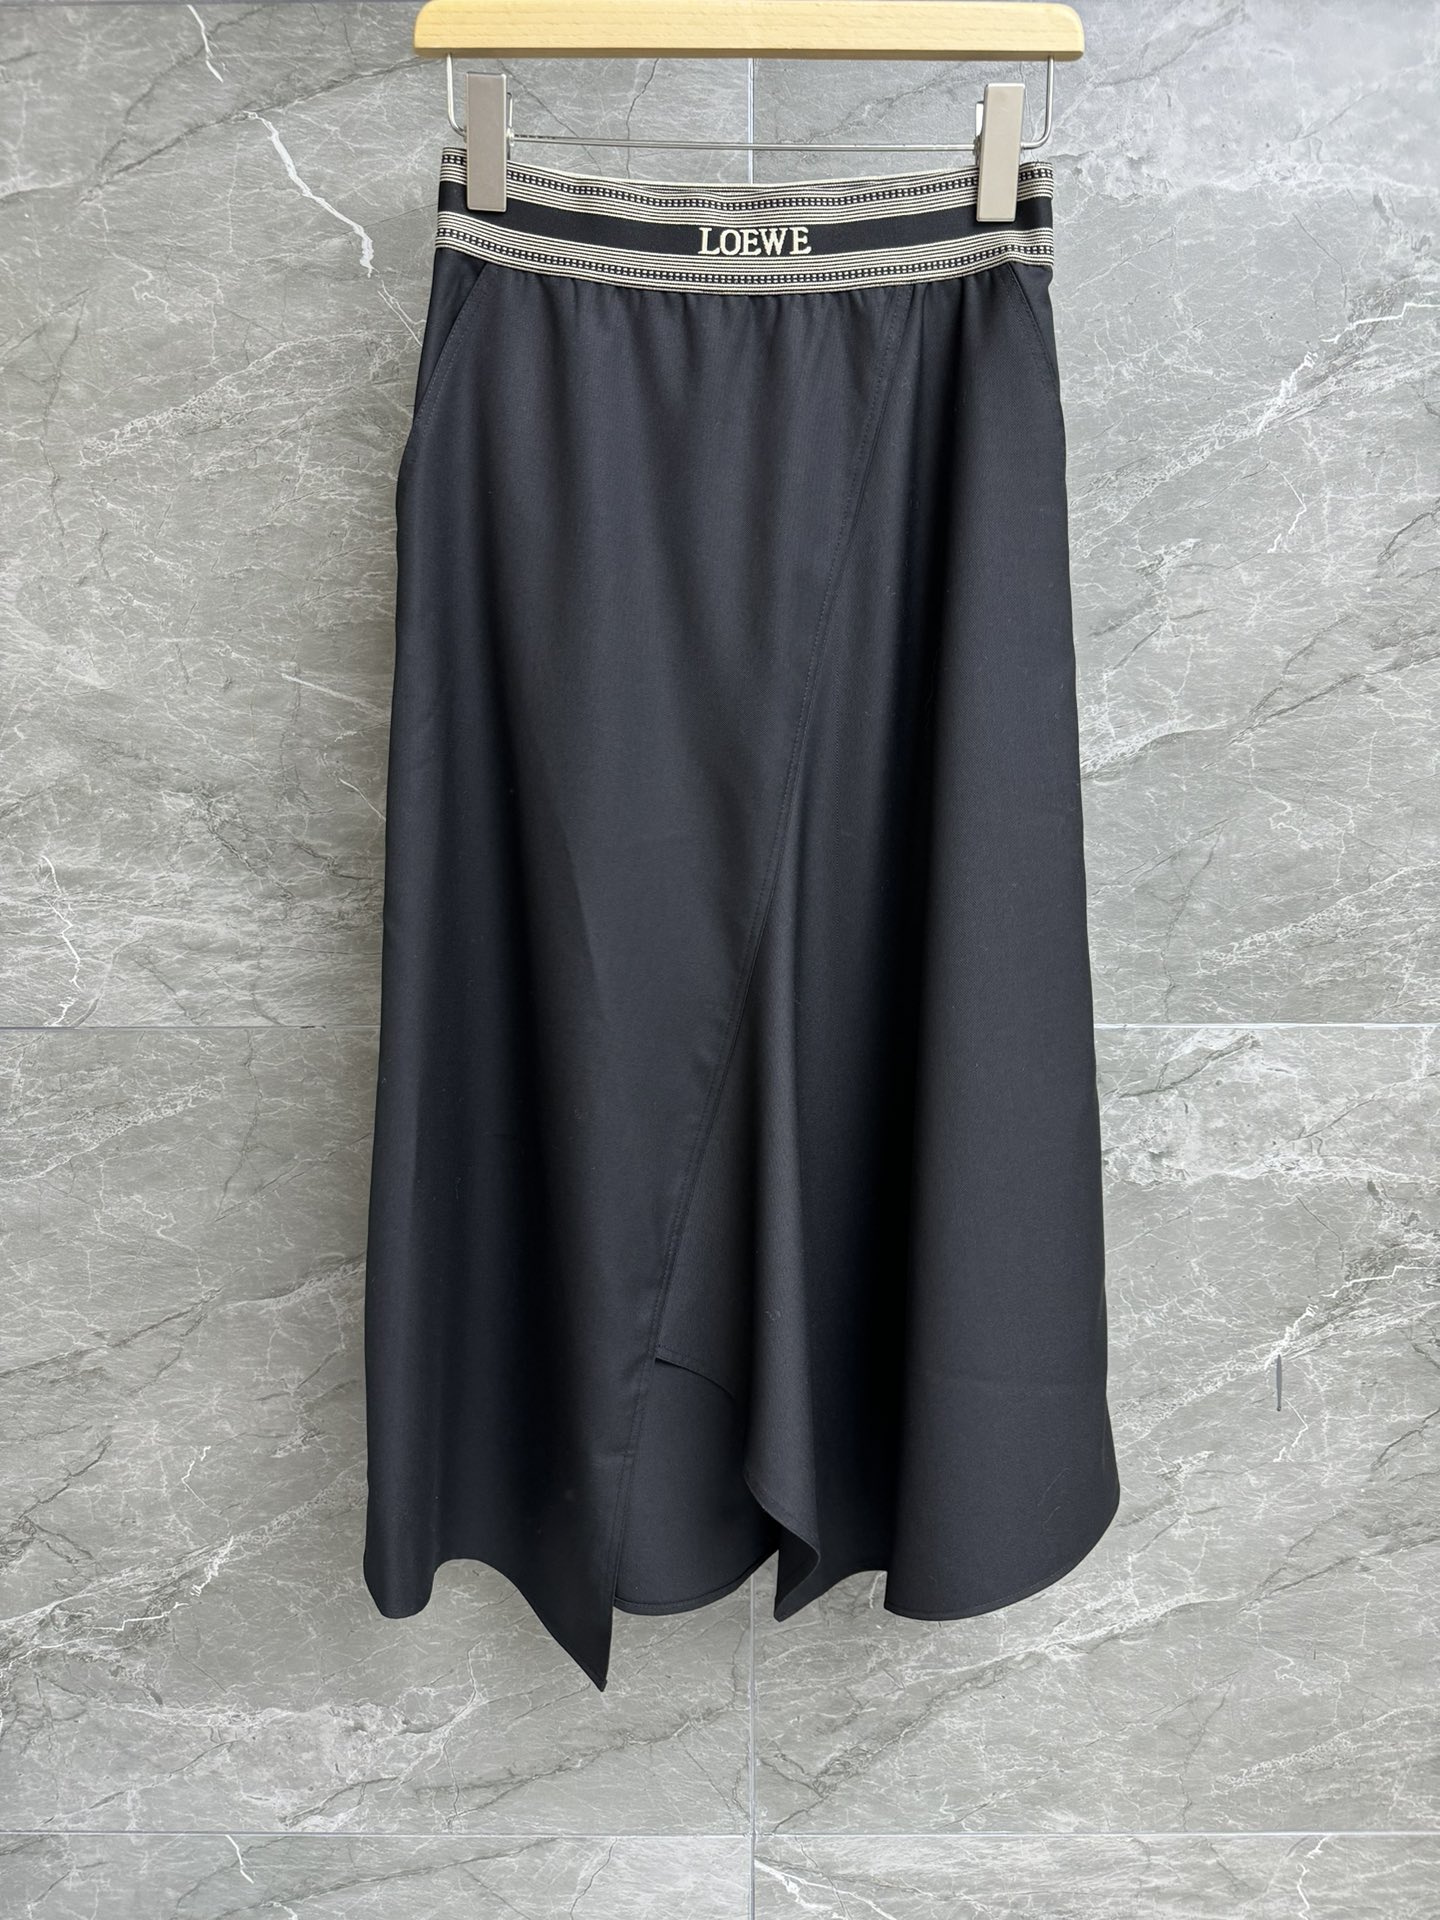 Loewe Clothing Skirts Spring Collection SML535280